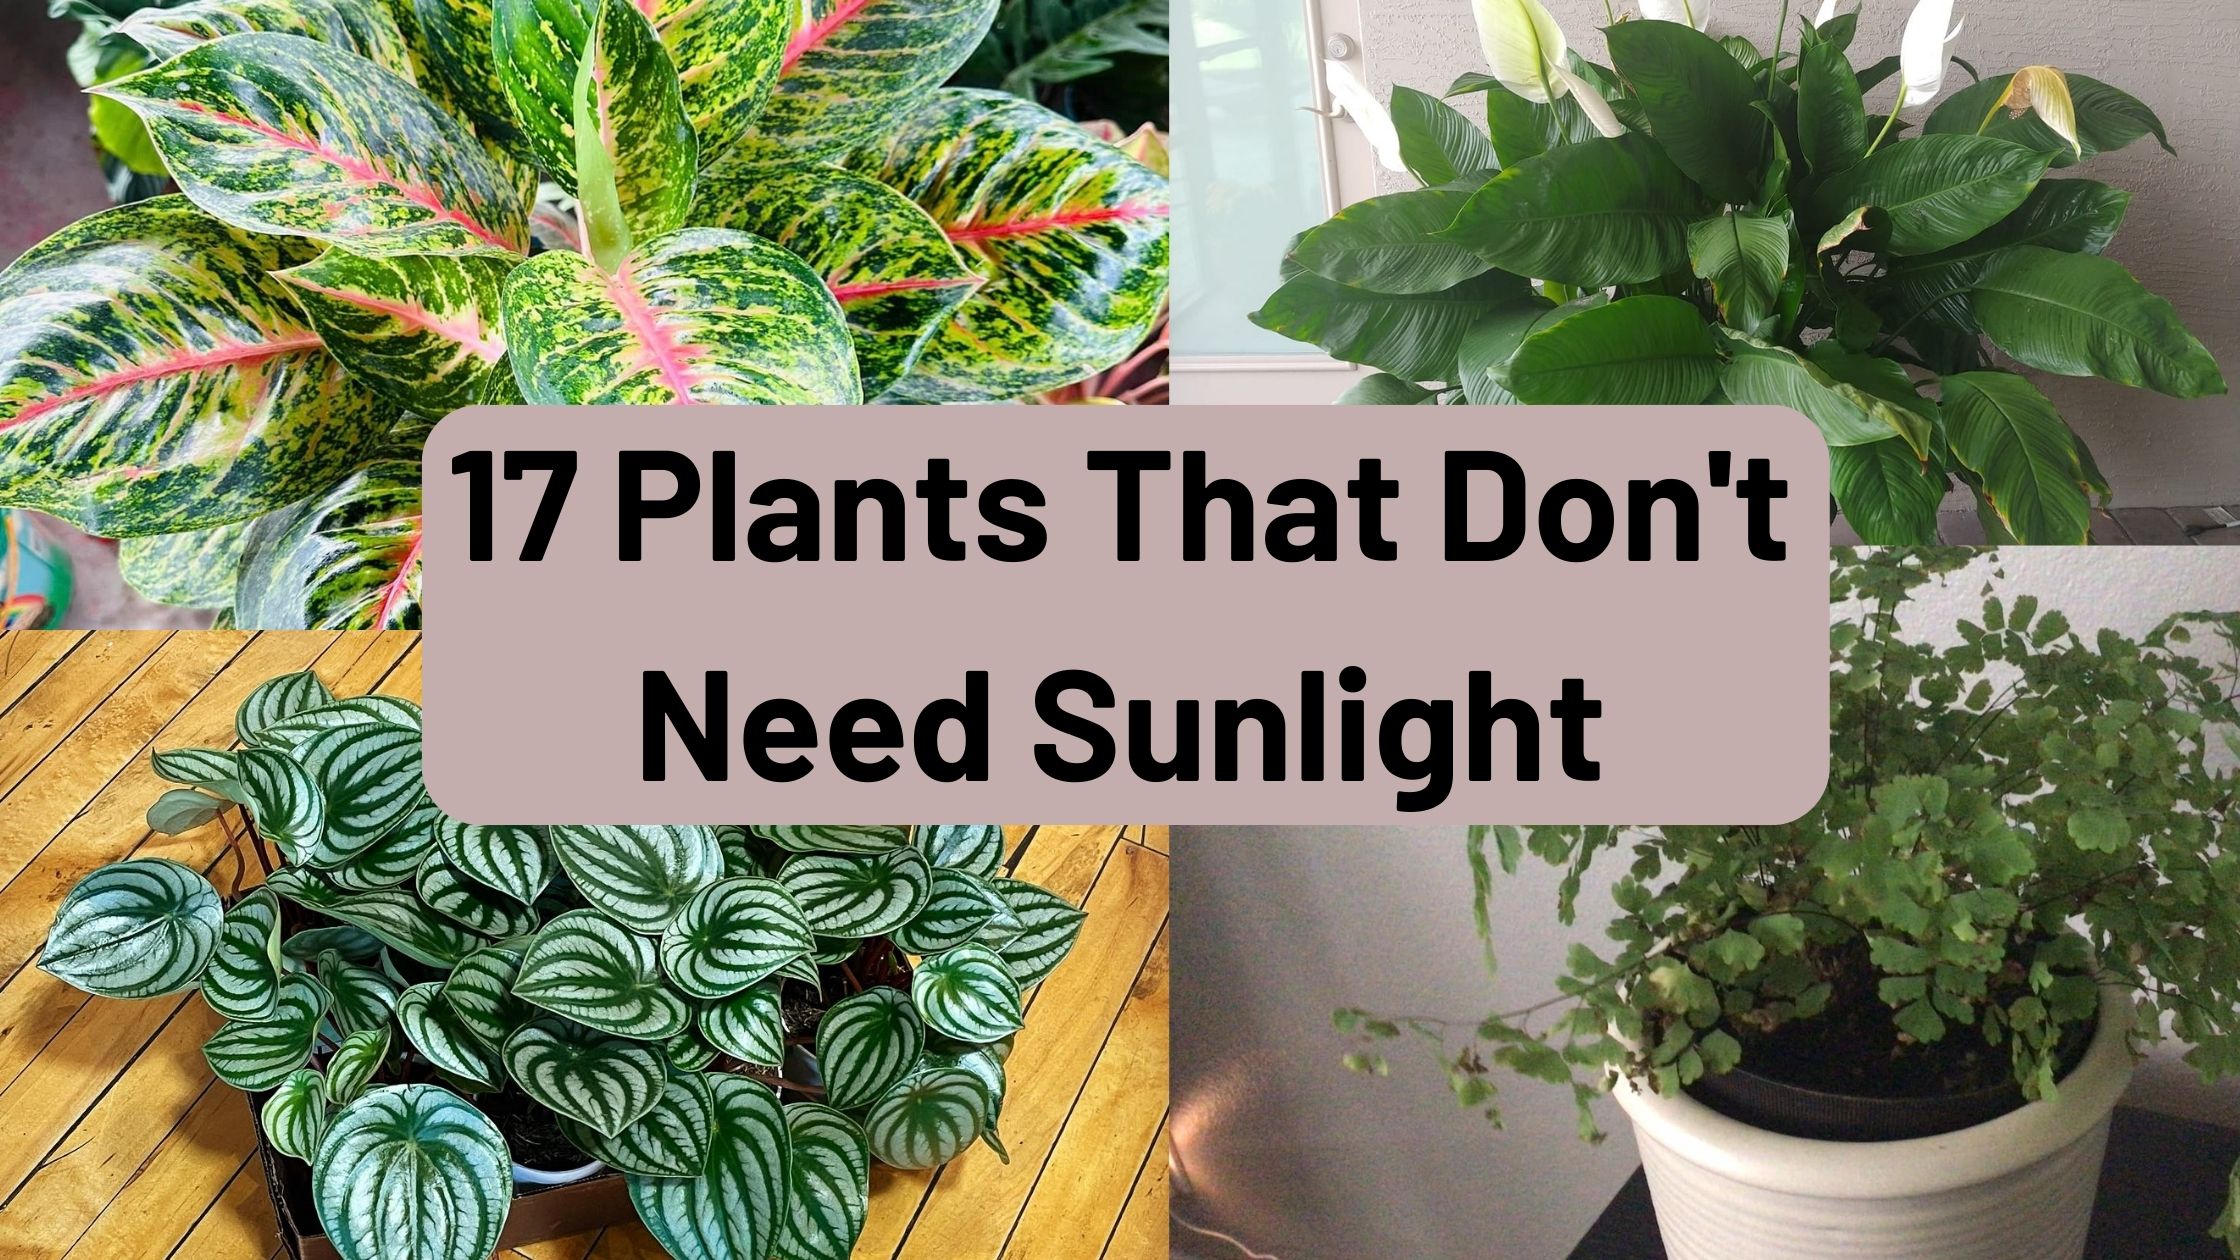 Plants That Don't Need Sunlight